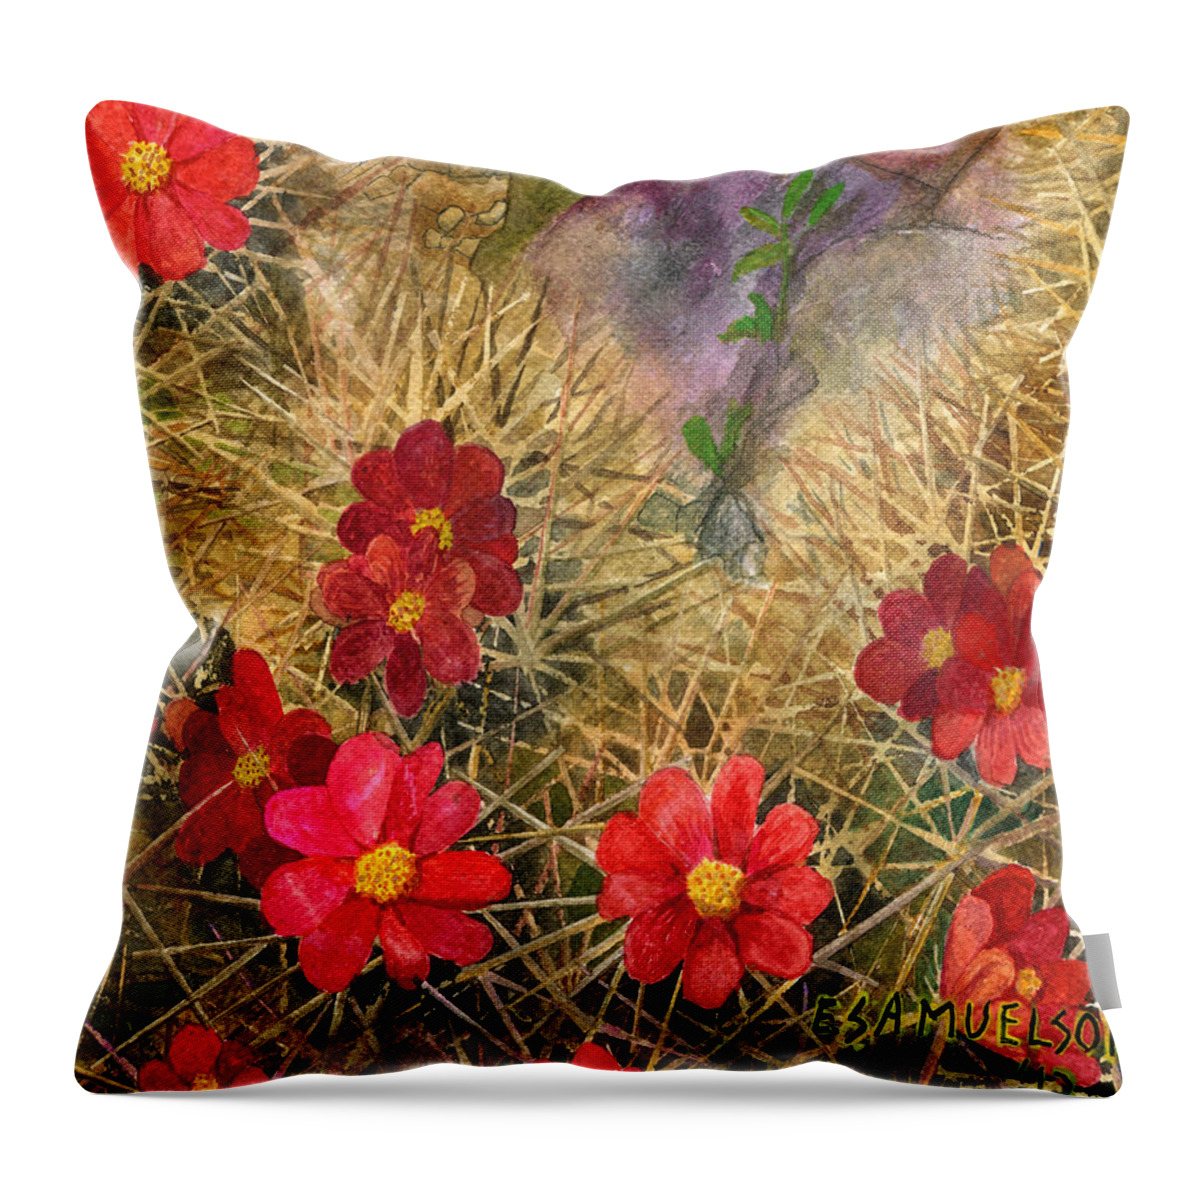 Hedge Hog Cactus In Bloom Throw Pillow featuring the painting Palo Verde 'mong the Hedgehogs by Eric Samuelson